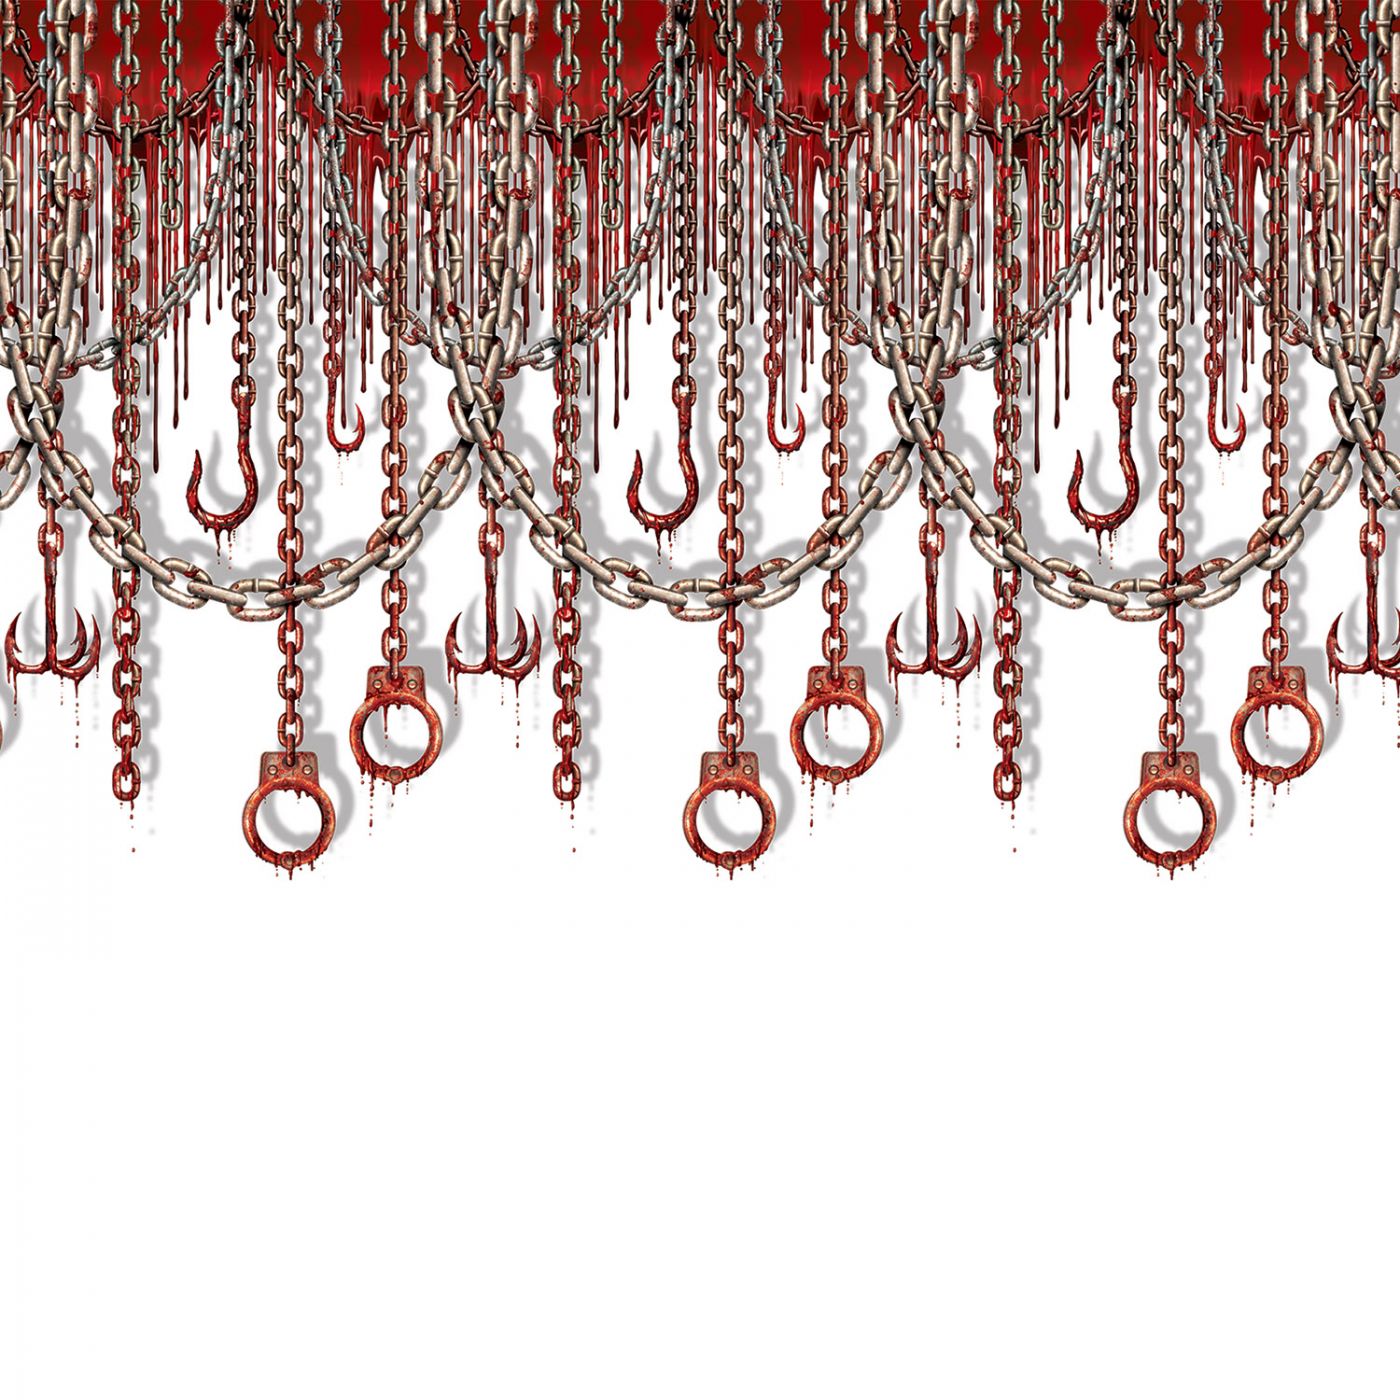 Bloody Chains & Hooks Backdrop (6) image